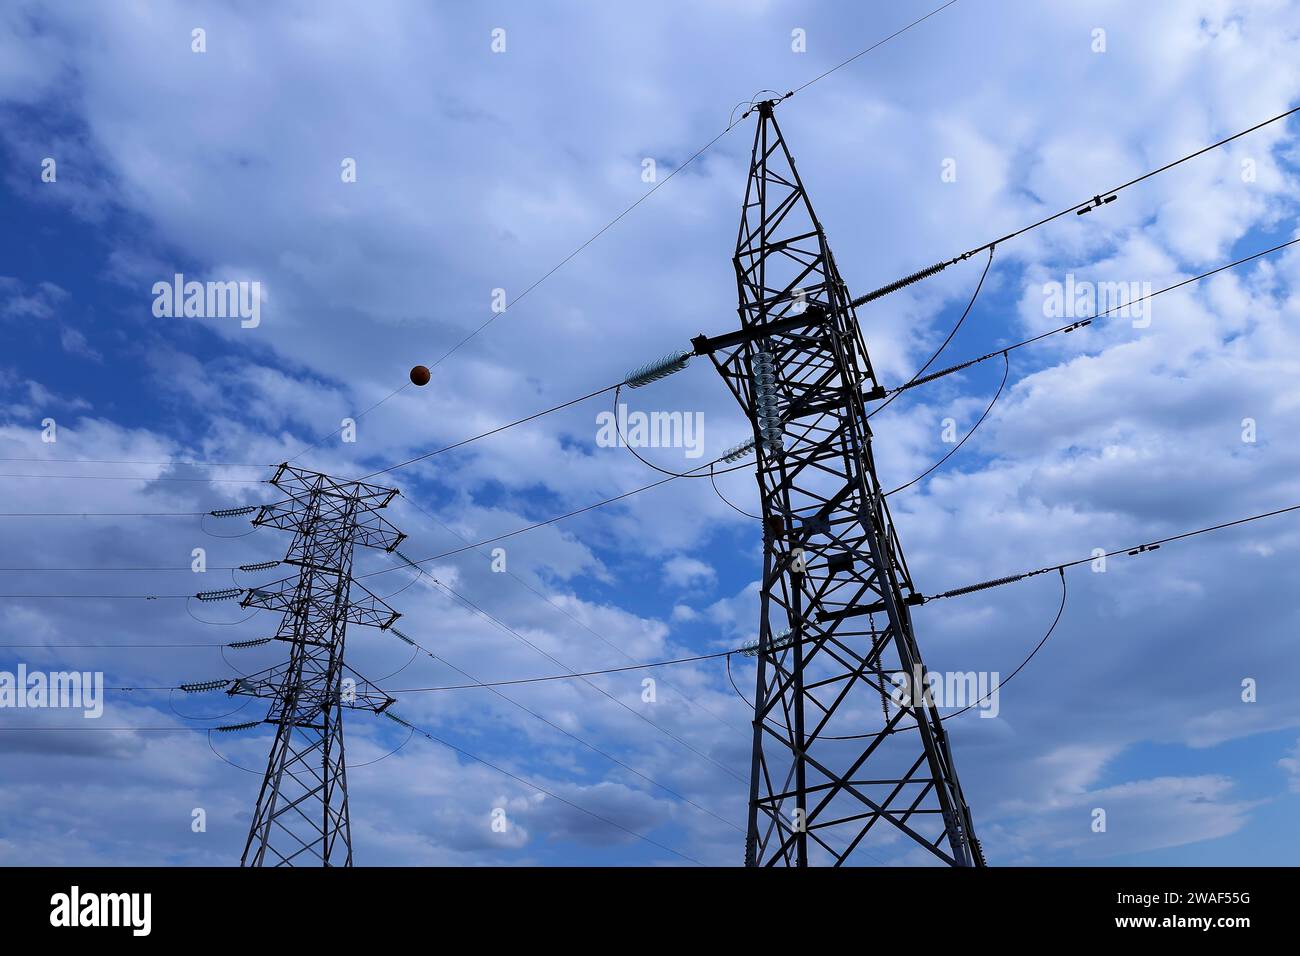 Electric power transmission tower and electrical power cables Stock Photo